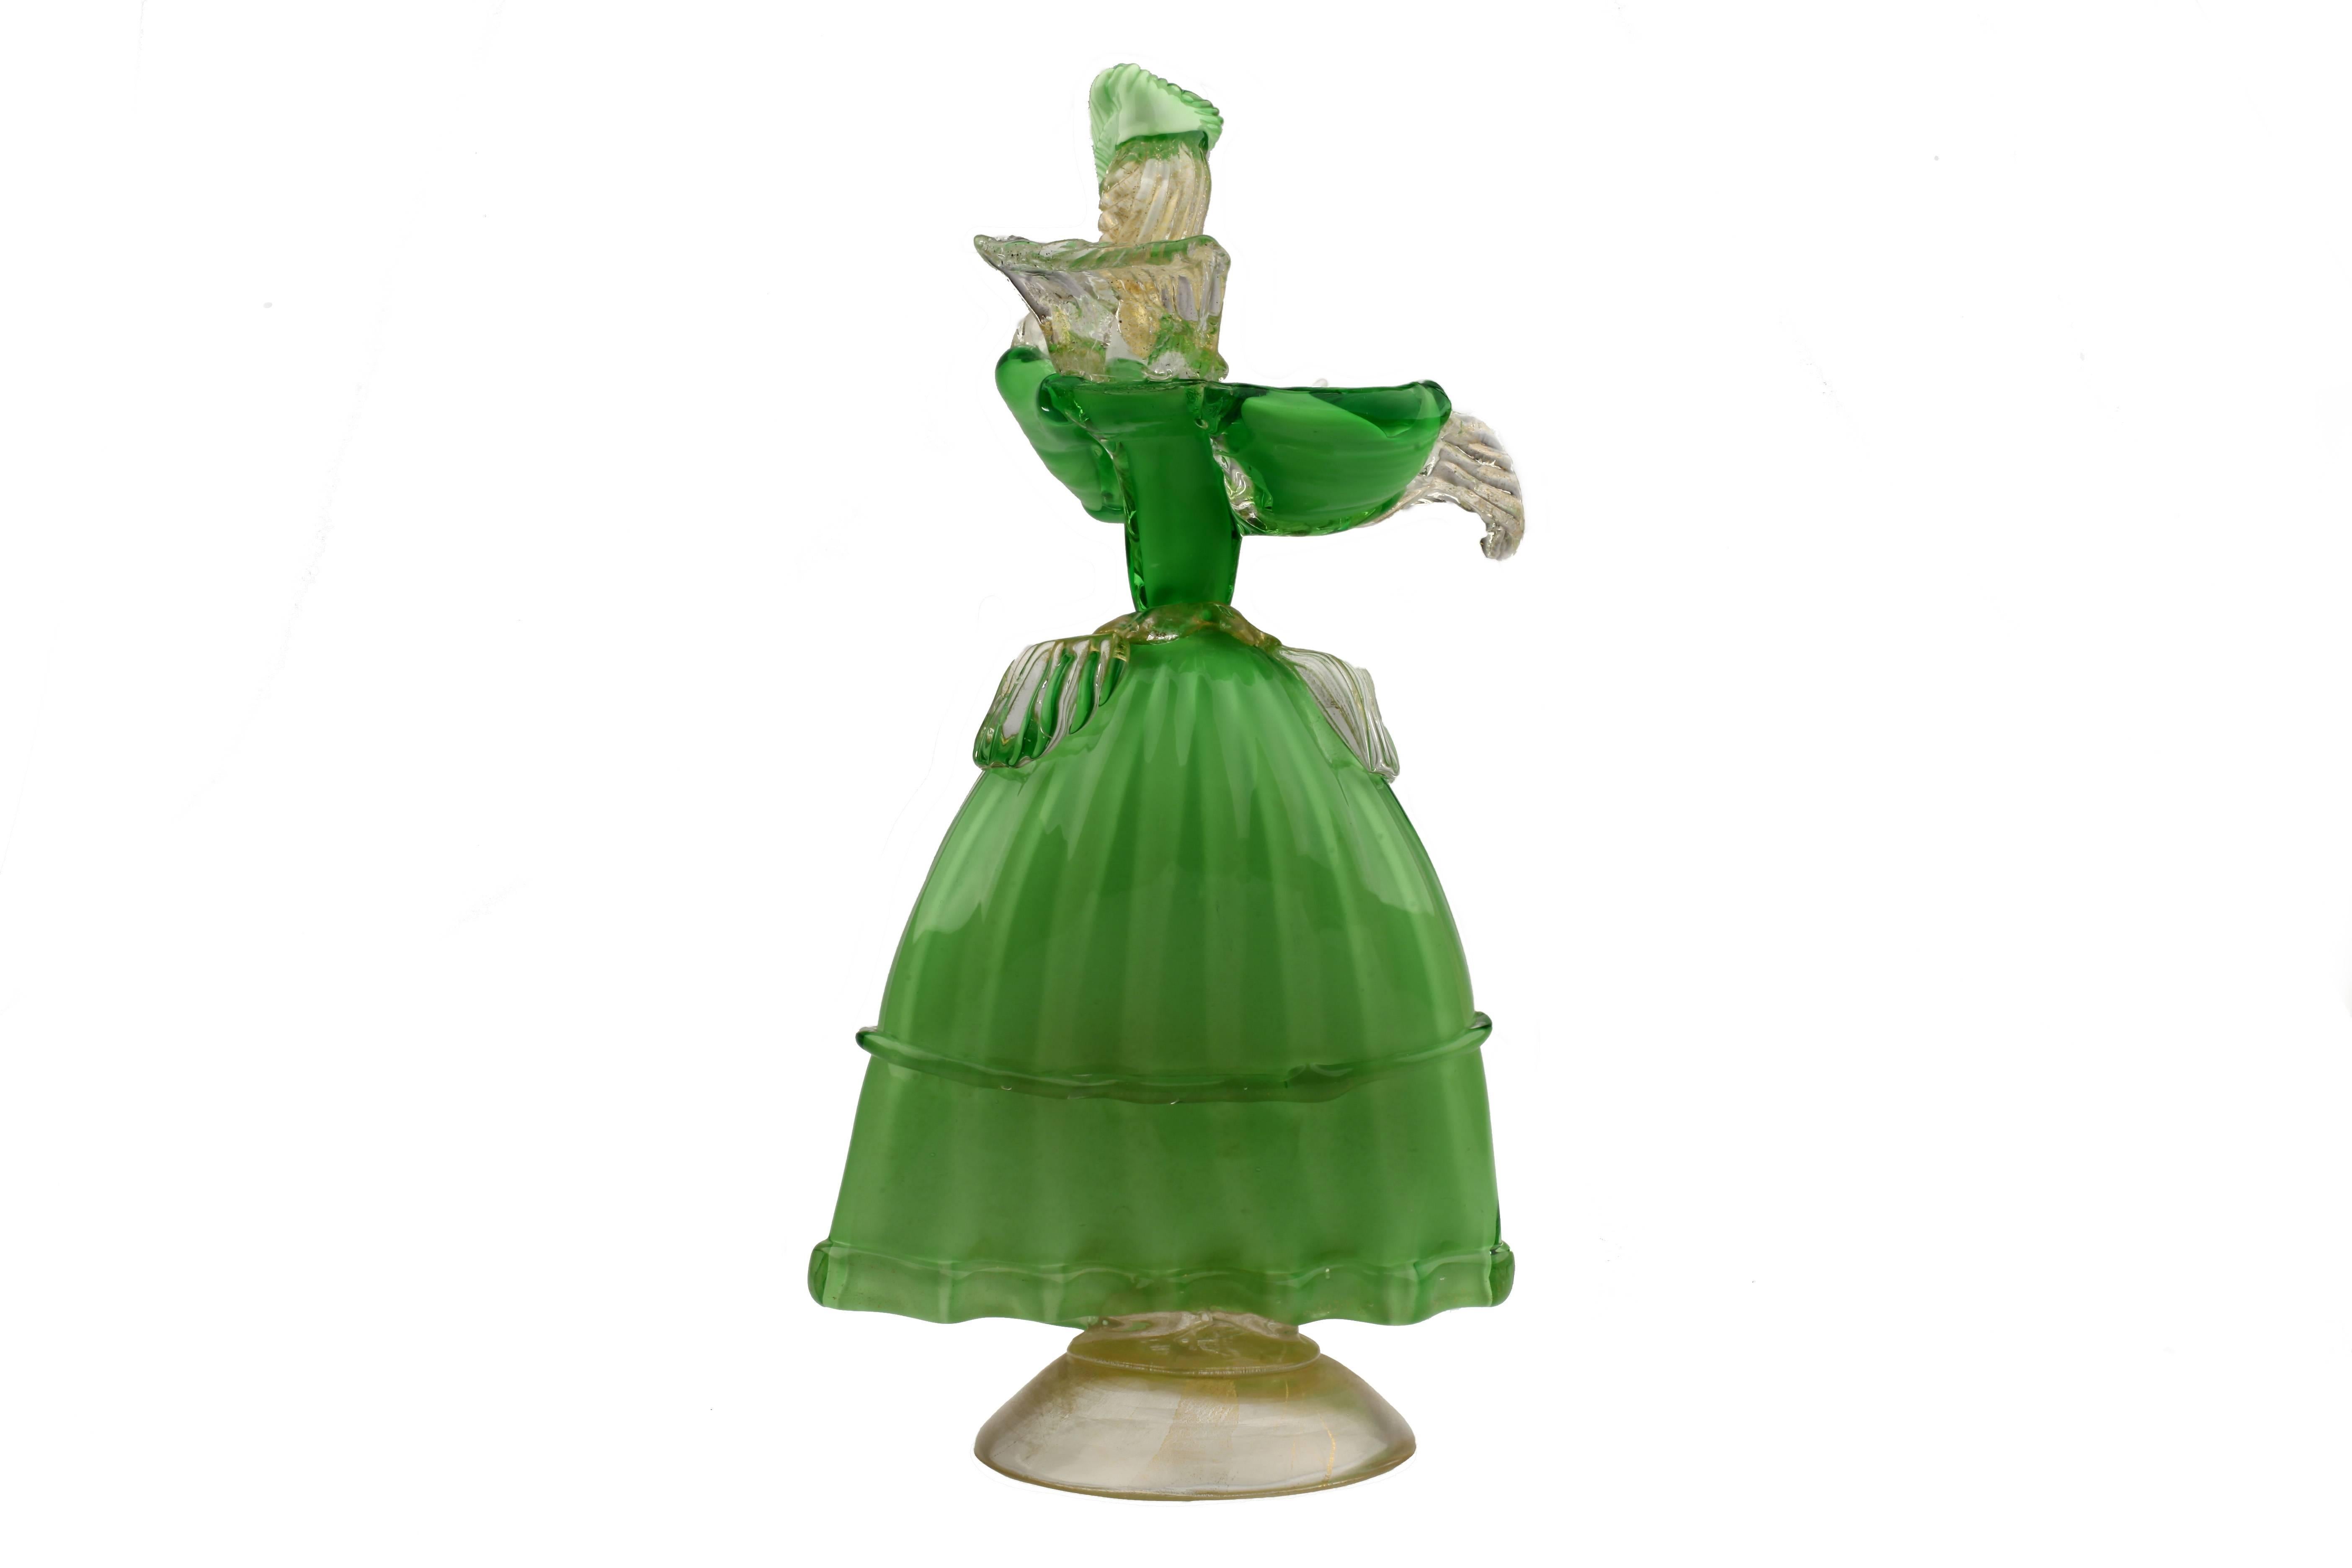 A stylish vintage Italian Formia Murano glass figurine of a lady in lavish and elaborate costume in green overlay glass on a white glass ground with white glass arms and head with clear glass frills with gold flecks and domed ribbed base with